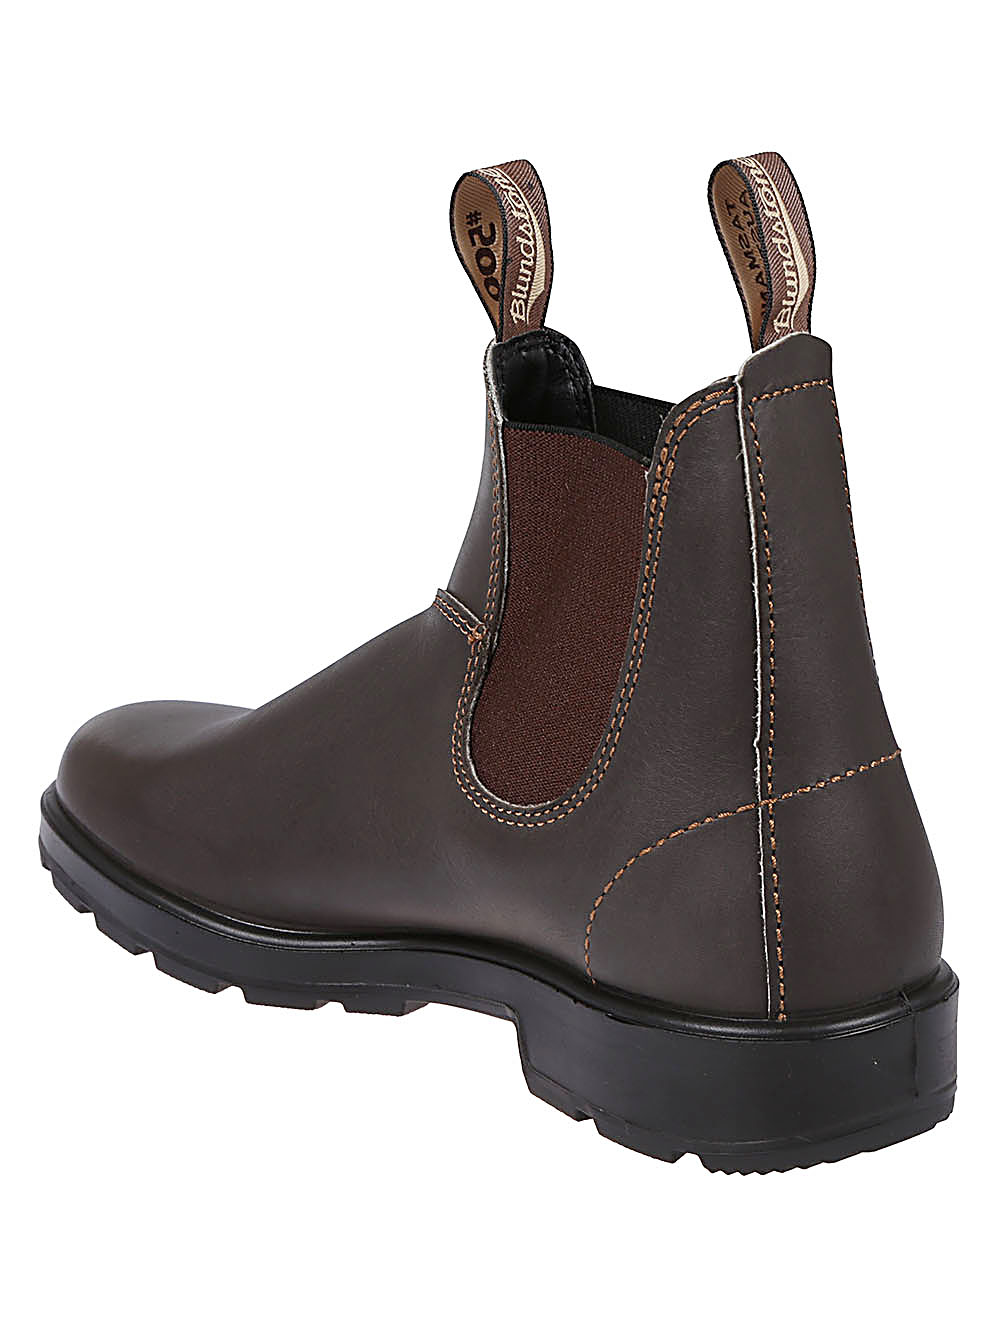 Blundstone BLUNDSTONE- 500 Leather Chelsea Boots